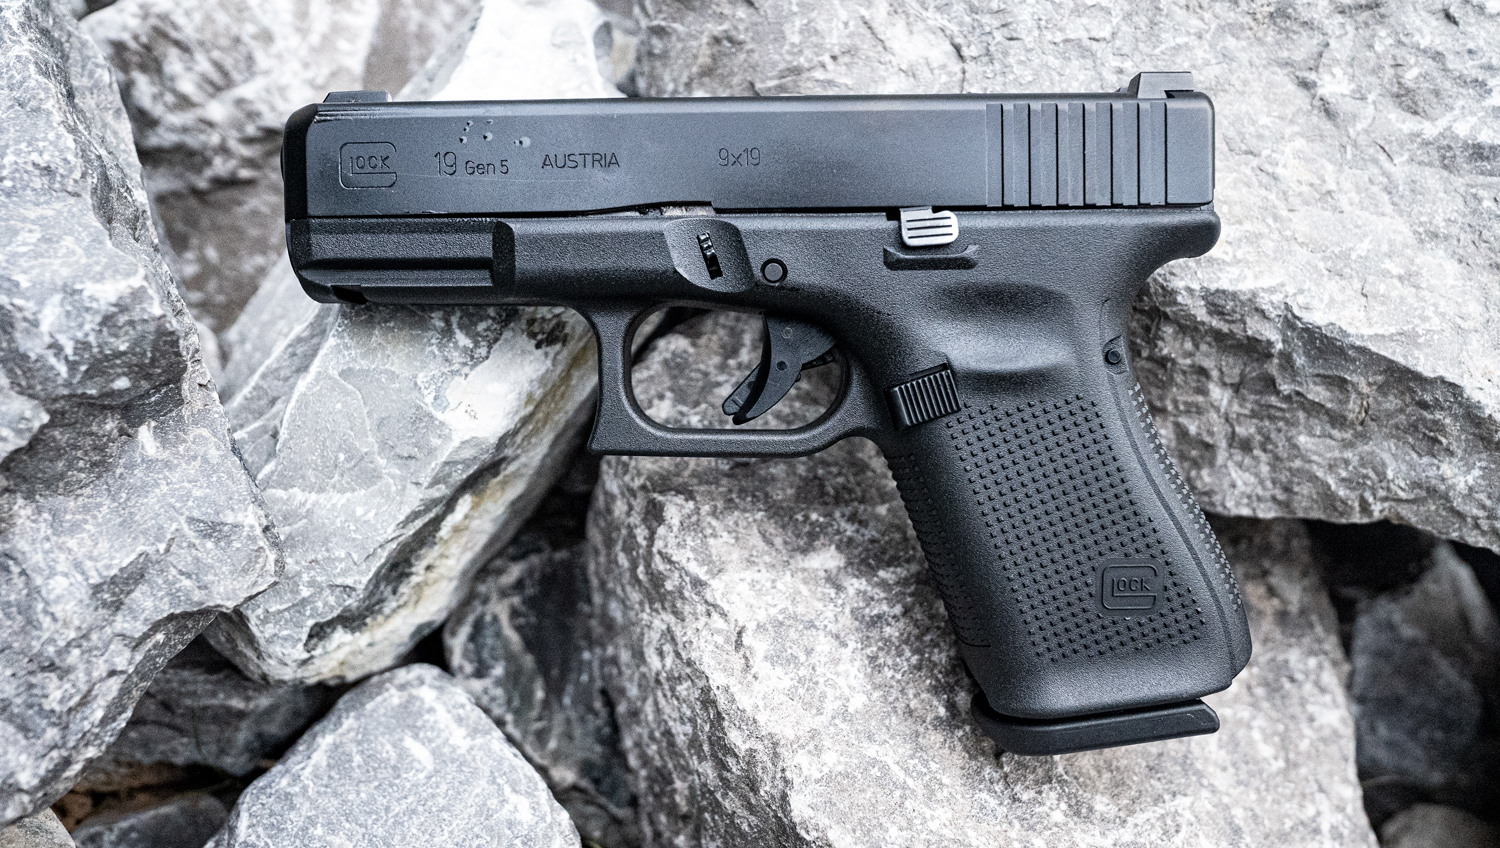 The Gen 5 Glock 19 is a good choice for concealed carry